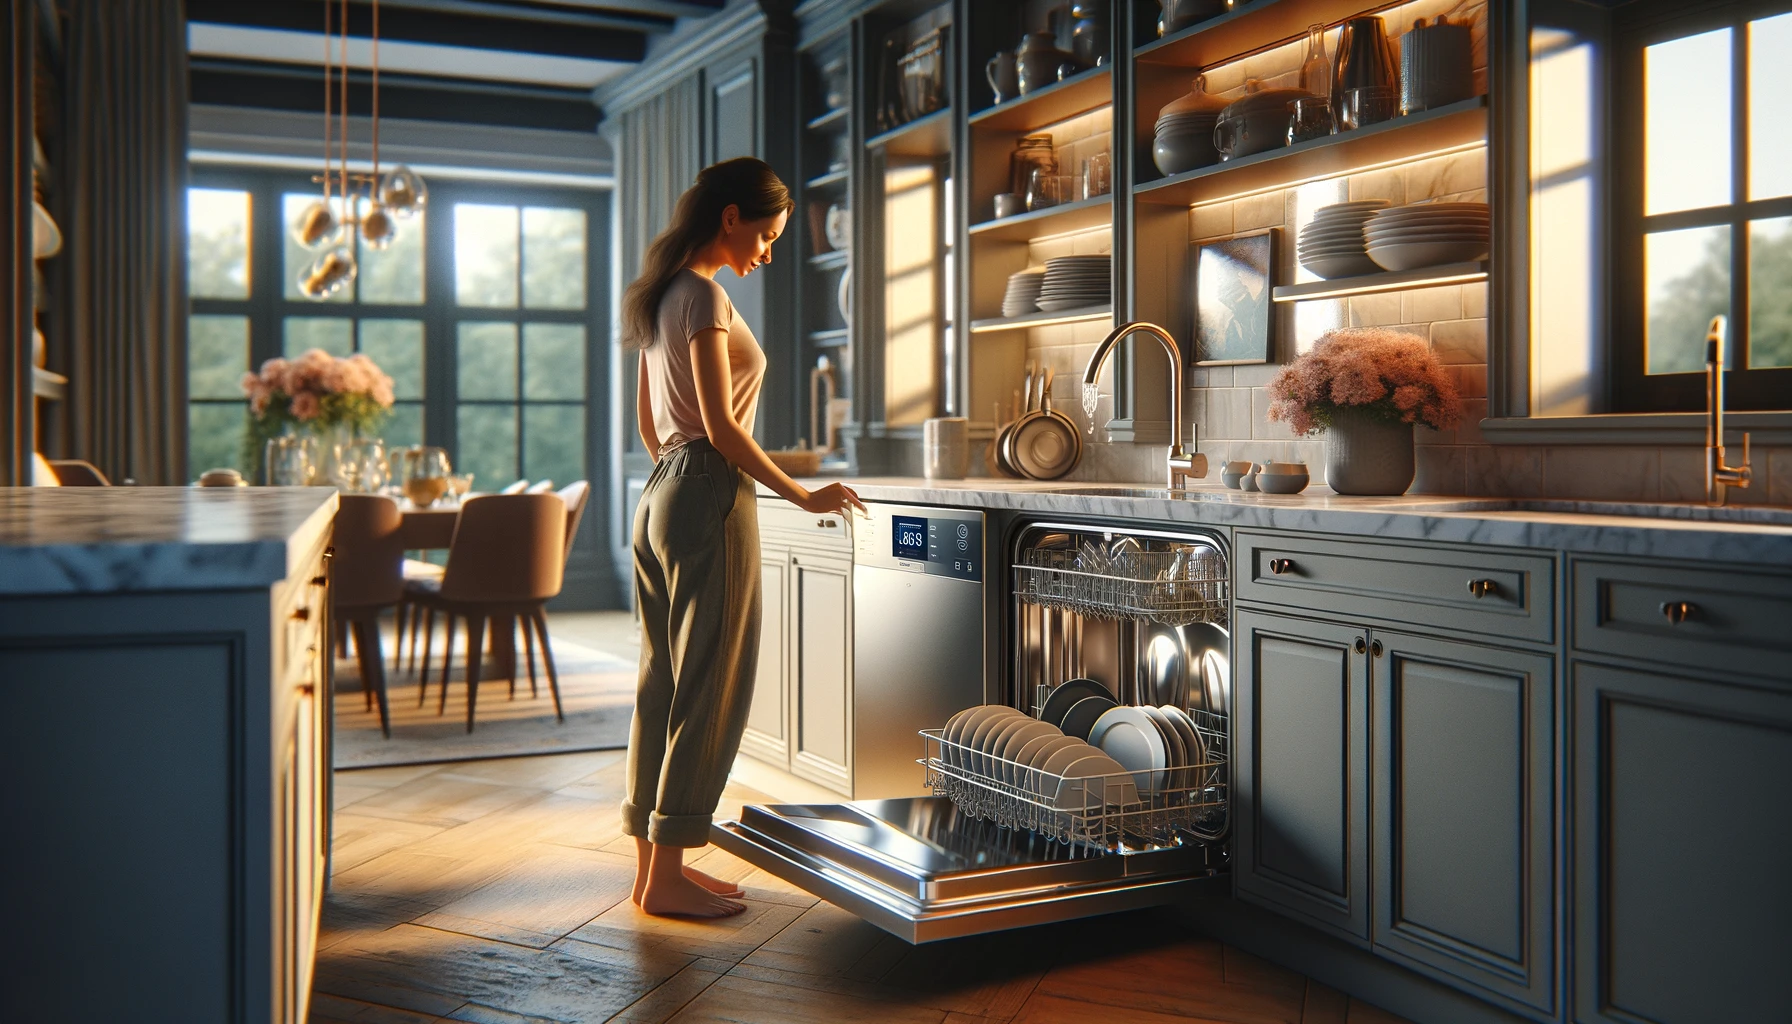 Tips on Selecting the Best Dishwasher Cycle